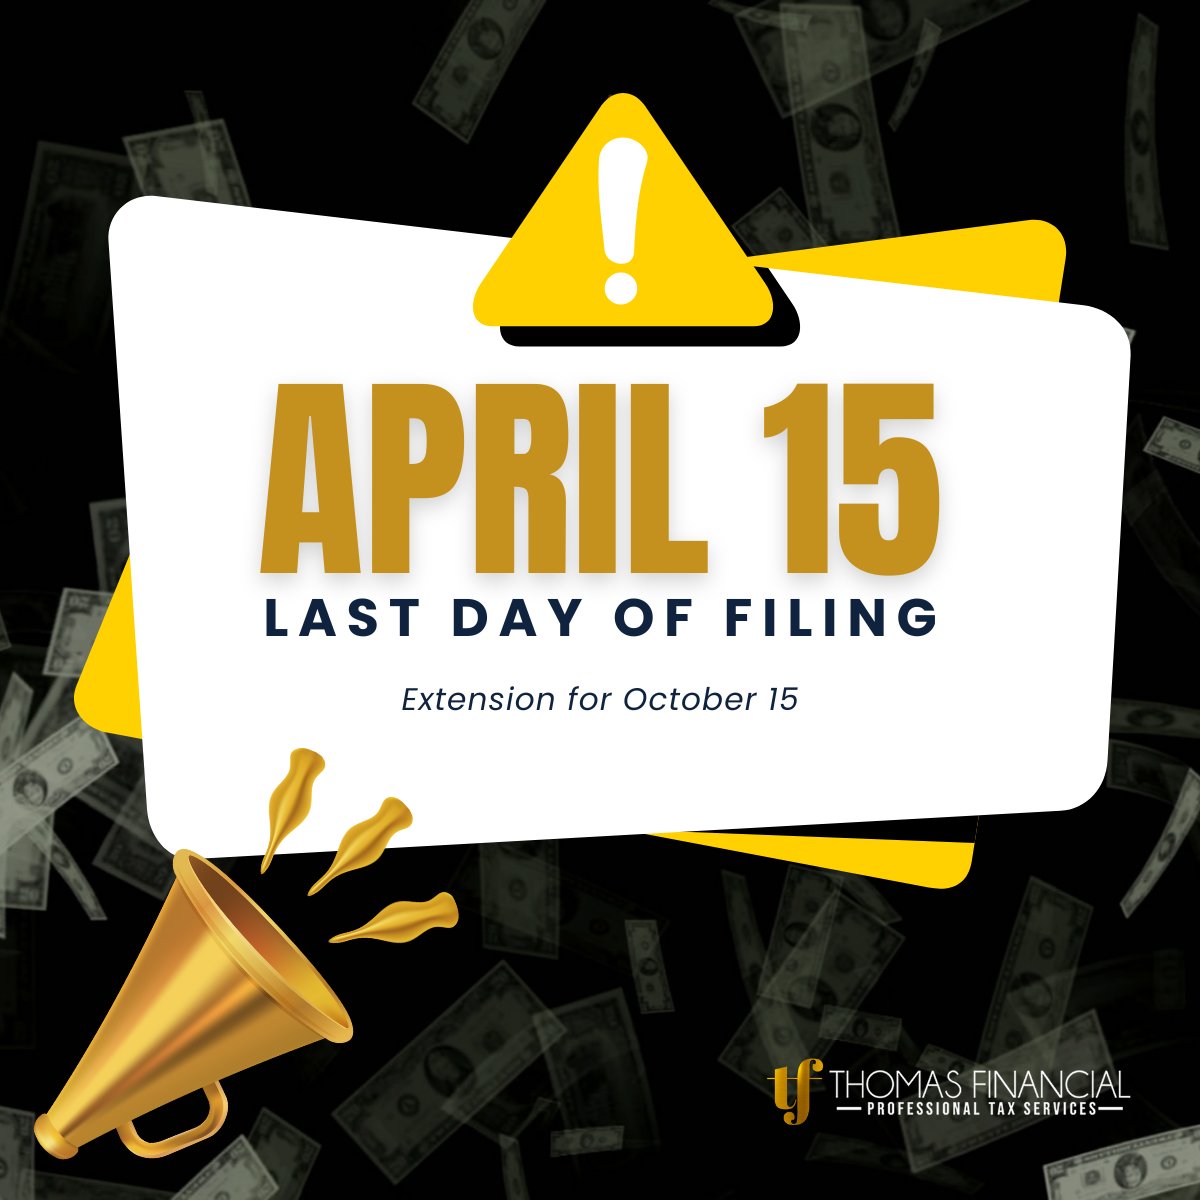 End of Tax Season is coming soon so make sure to file with us on or before April 15. If you are not ready yet, file for an extension for October 15.

Upload your documents at bit.ly/3PNp3WR

#Taxpreparer #Taxsoftware #Taxbusiness #Startyourowntaxbusiness #ThomasFinancial